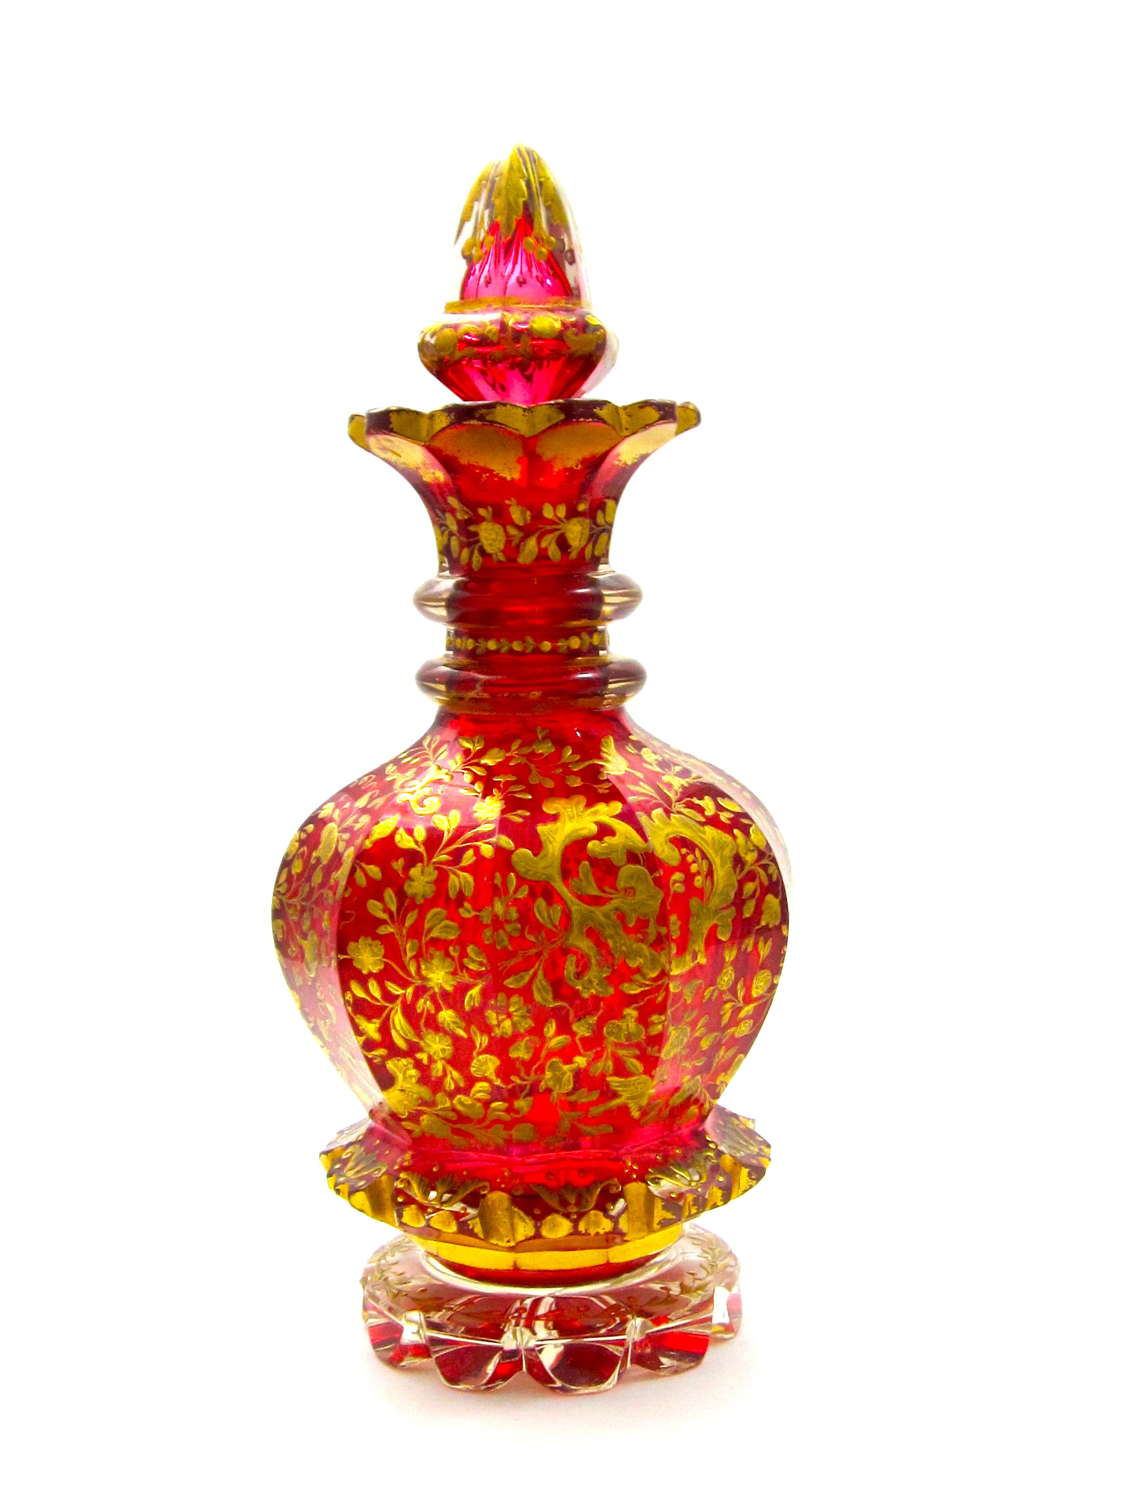 RARE Exceptional Large Bohemian Cranberry Crystal Perfume Bottle